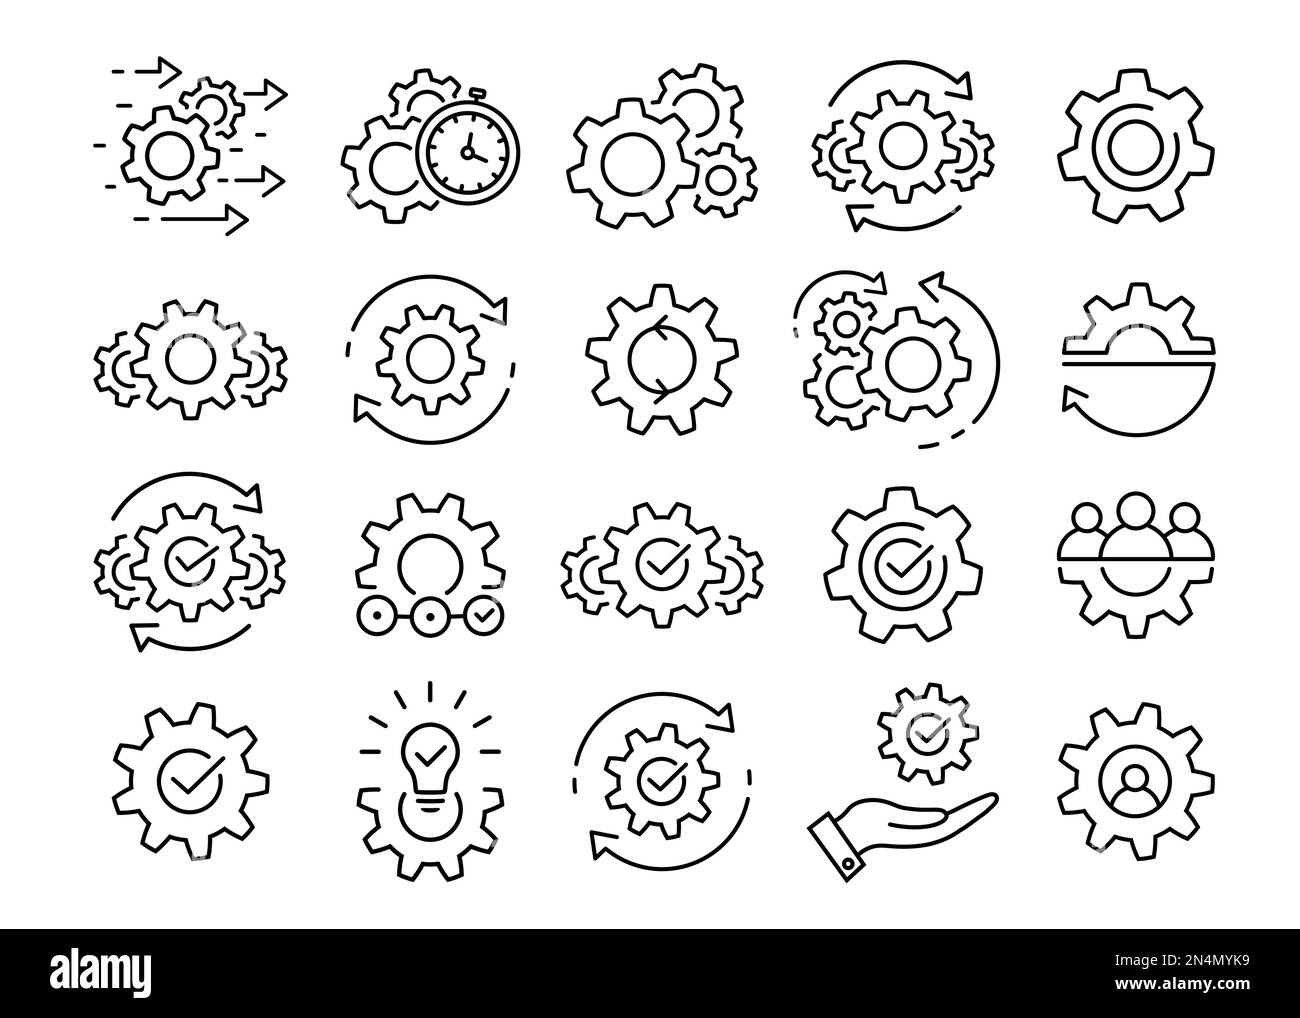 Process management icon set Gears and cogs symbols Stock Vector